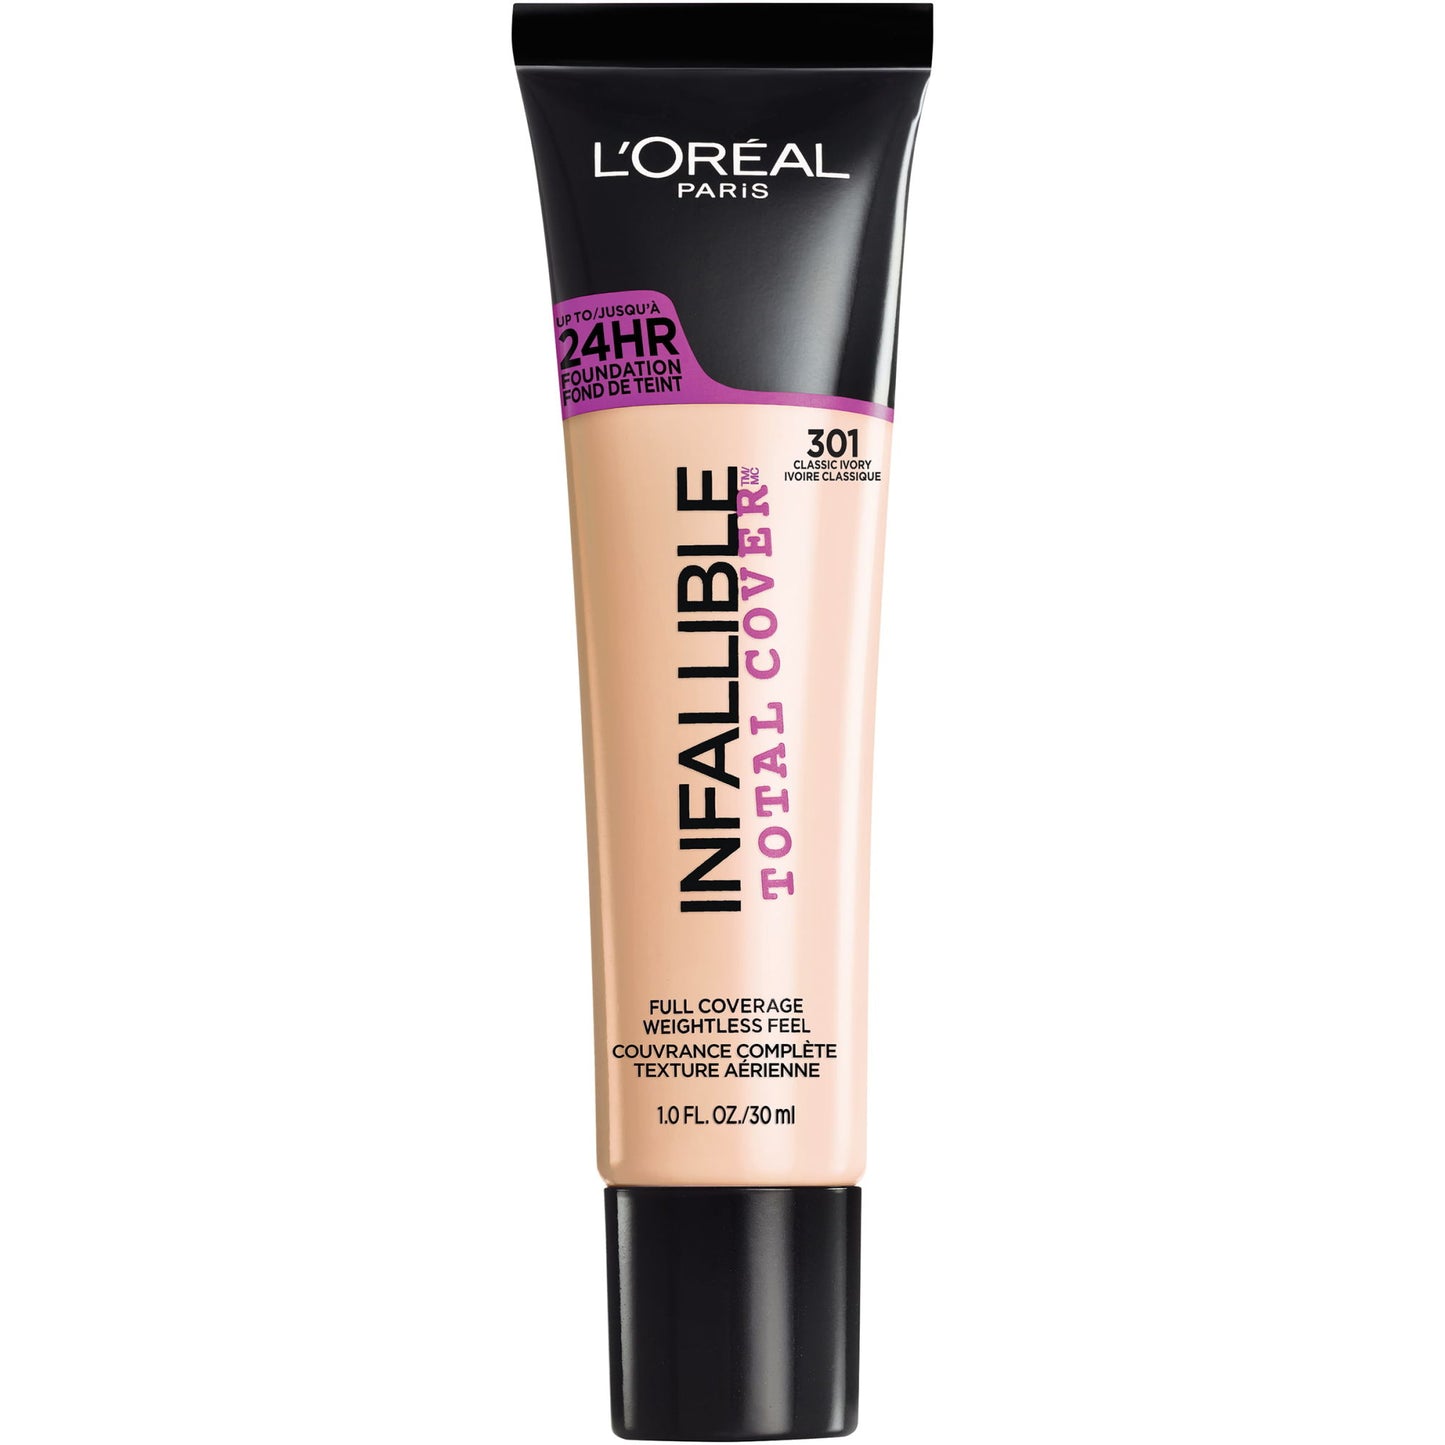 L'Oreal Paris Infallible Total Cover Foundation, Classic Ivory, 1 fl oz